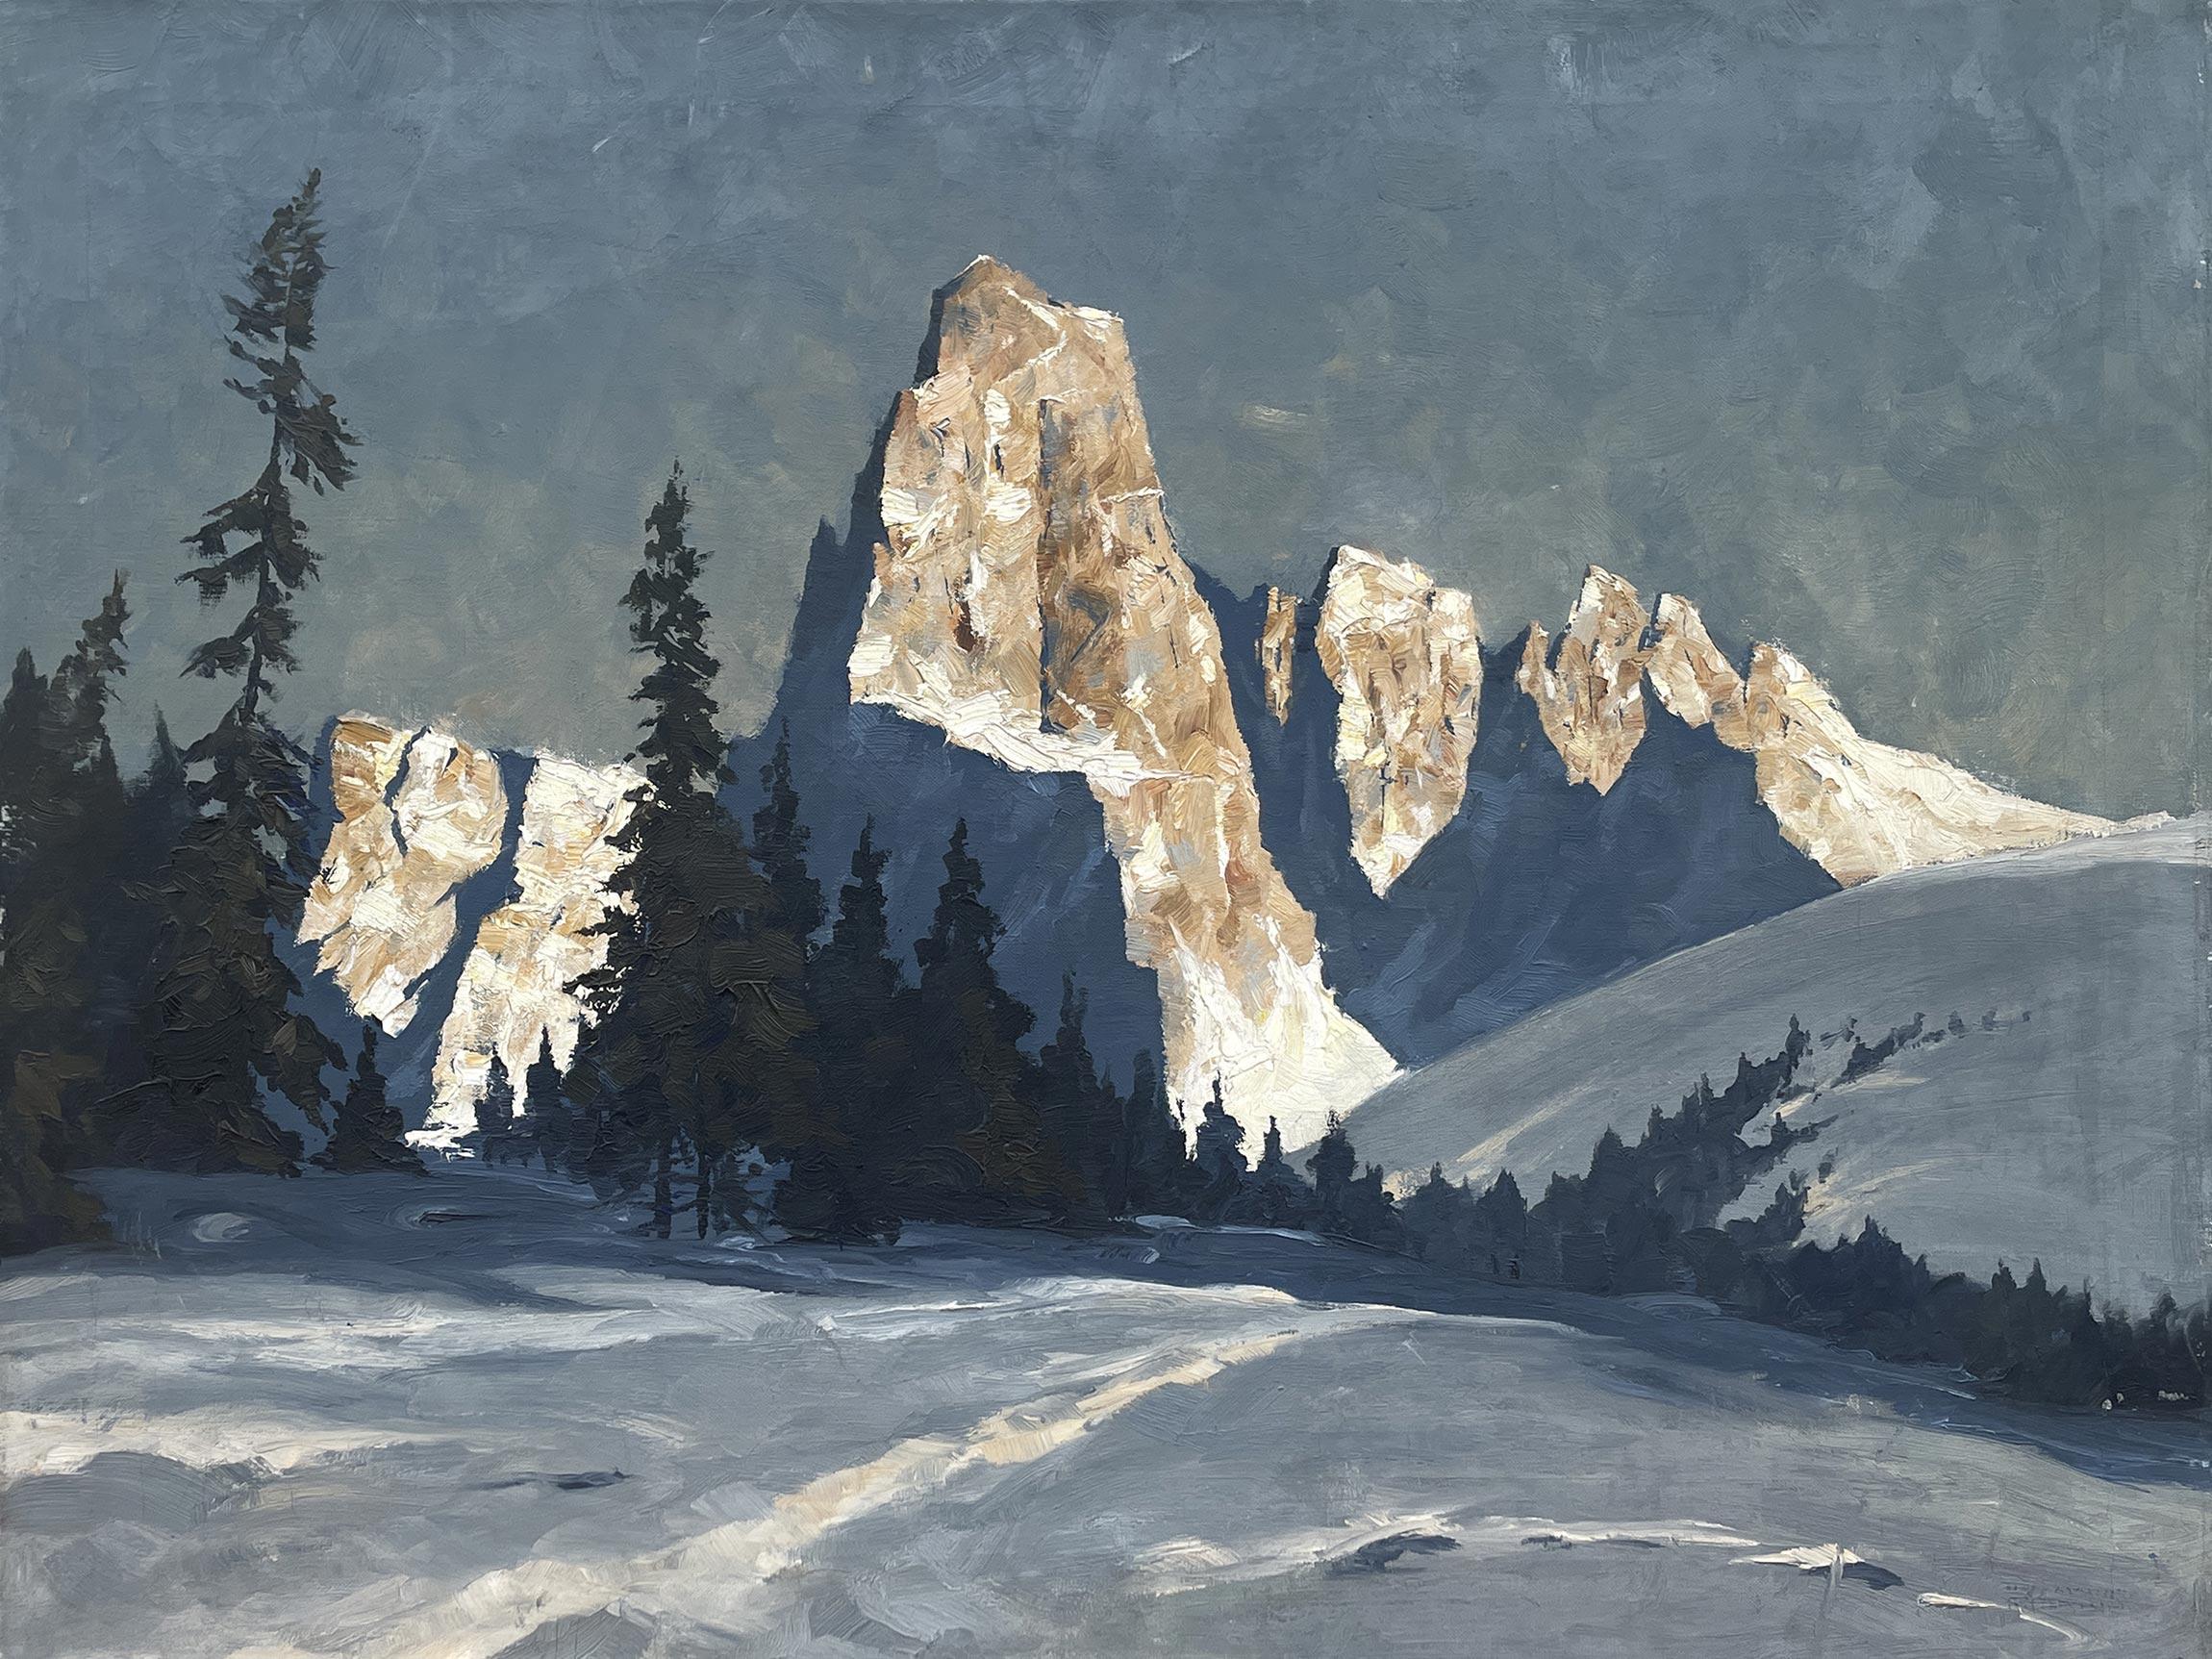 Winter on the Sciliar – Georg Grauvogl (1896 – 1986)

60 x 80 cm without frame
64 x 84 cm with antique fir frame

oil painting on canvas
1930s

In this painting Grauvogl, with his effective painting rich in contrasts, perfectly renders the snowy